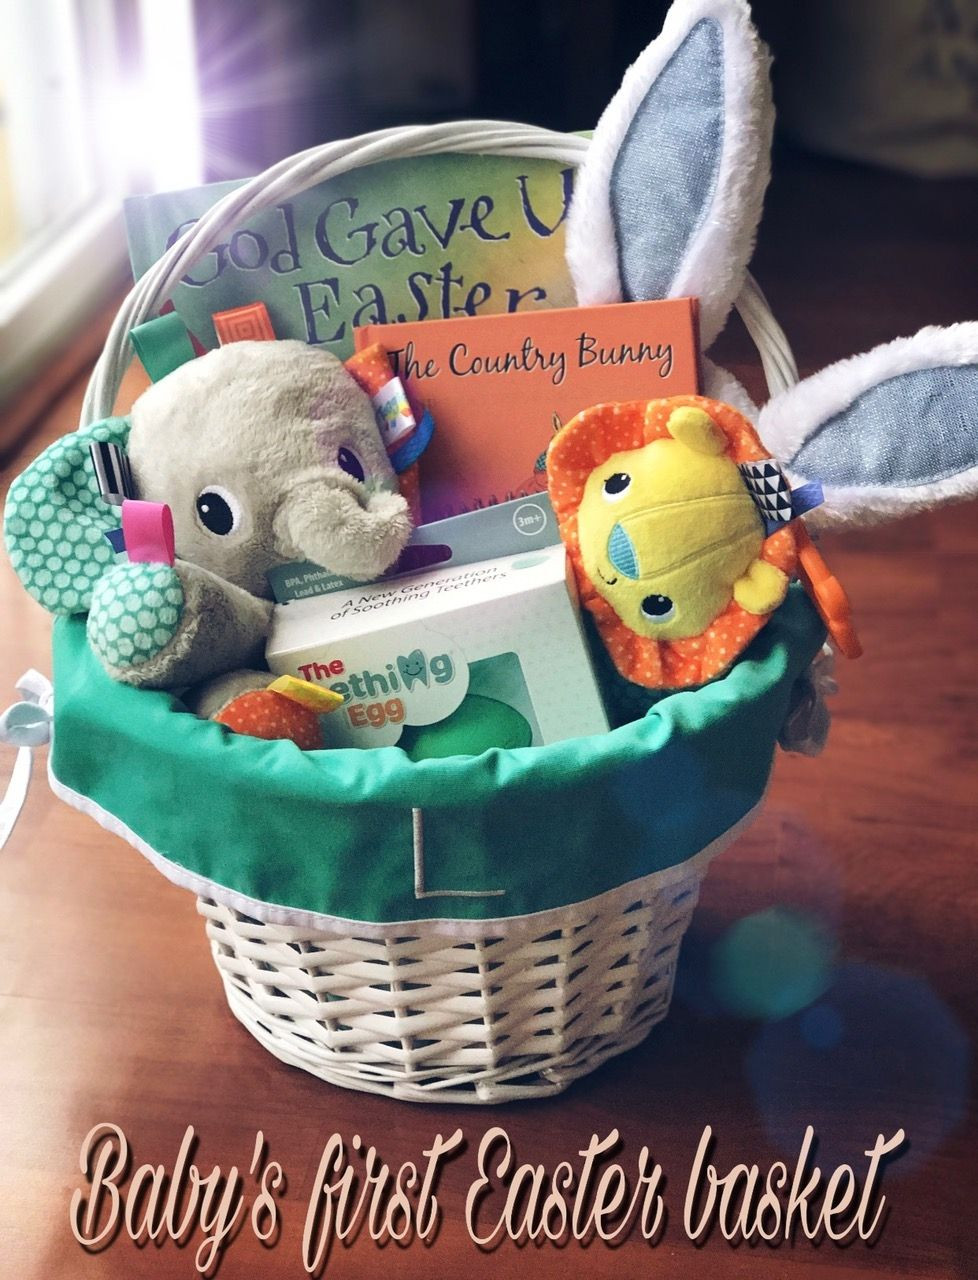 Gift Ideas For Baby'S First Easter
 Baby’s first Easter basket – As The Speerit Moves You